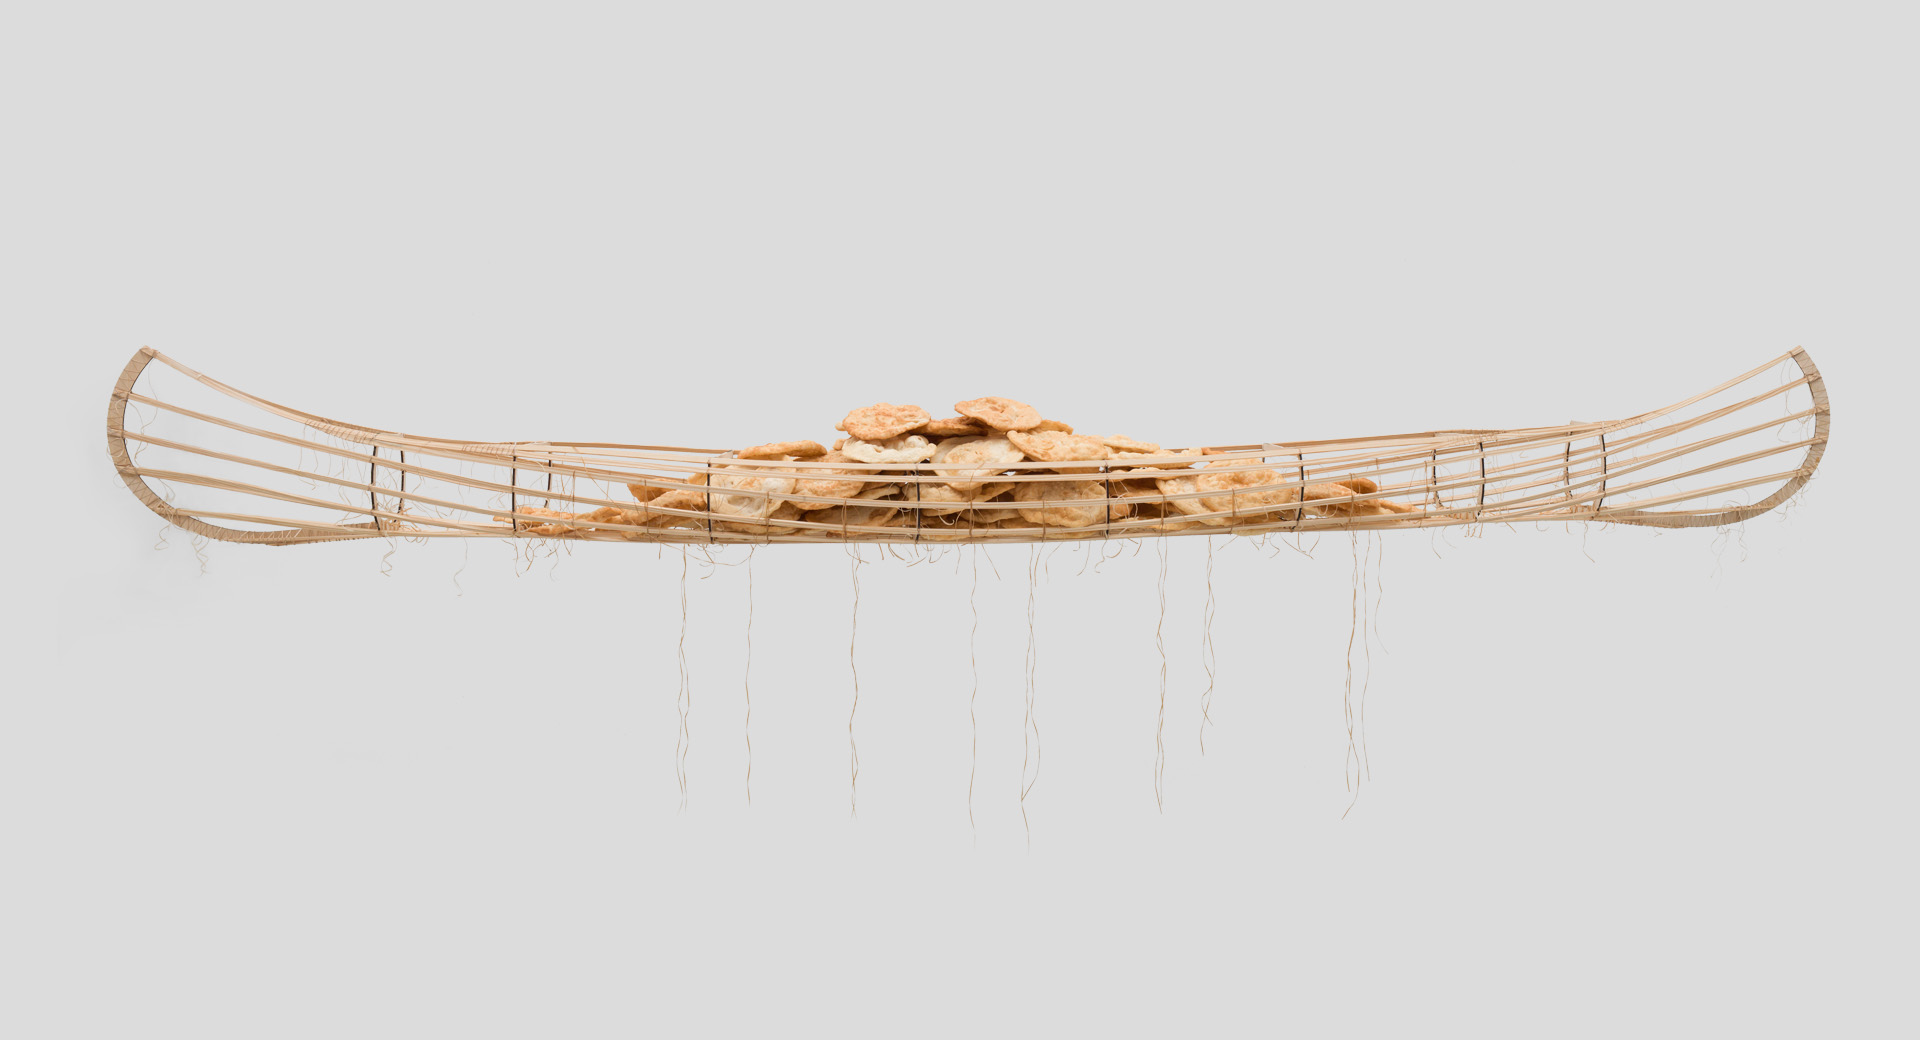 Framework of a wooden canoe filled with rocks.